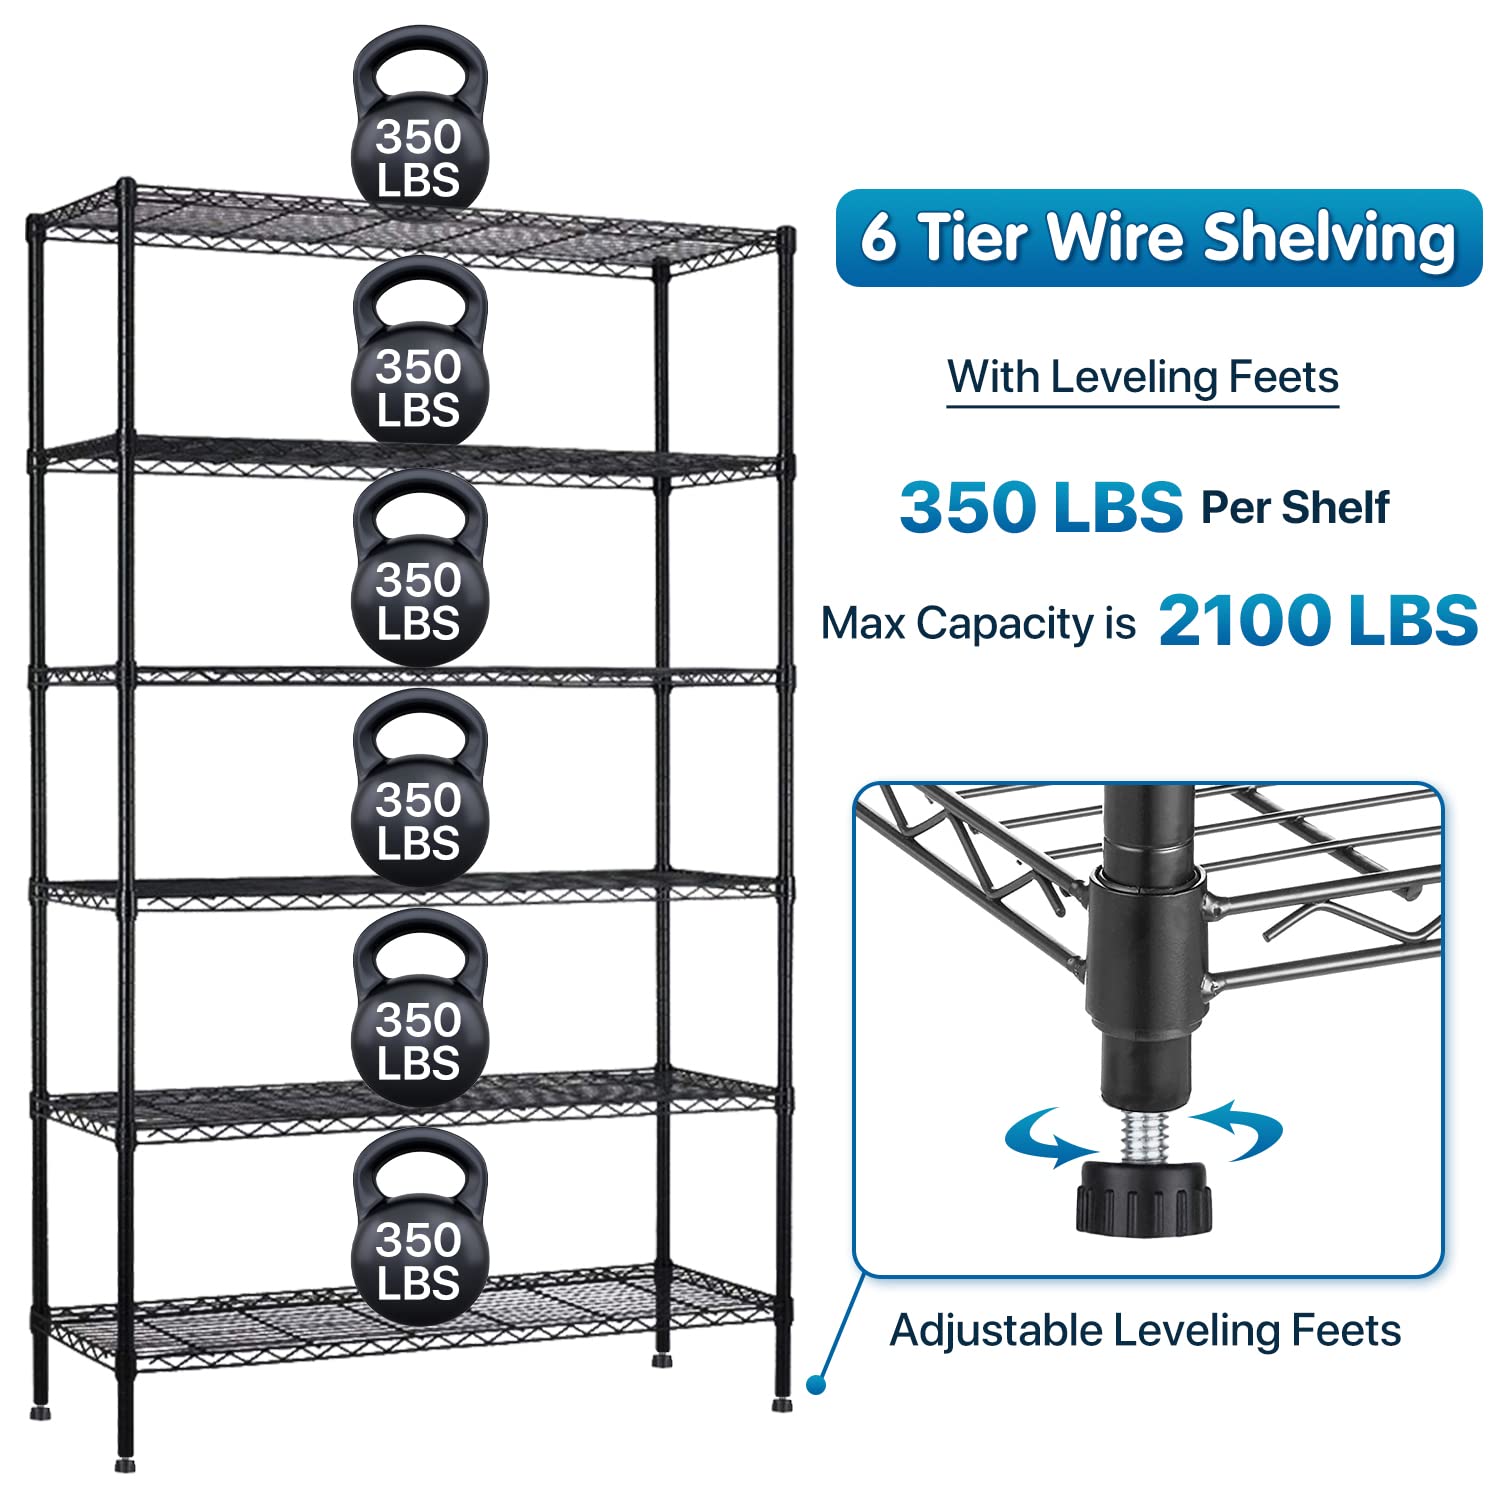 Storage Shelves Metal Shelf Wire Shelving Unit with Wheels 6 Tier NSF Certification Height Adjustable Garage Shelving Utility Steel Heavy Duty Commercial Grade Shelving Rack for Garage Pantry Kitchen